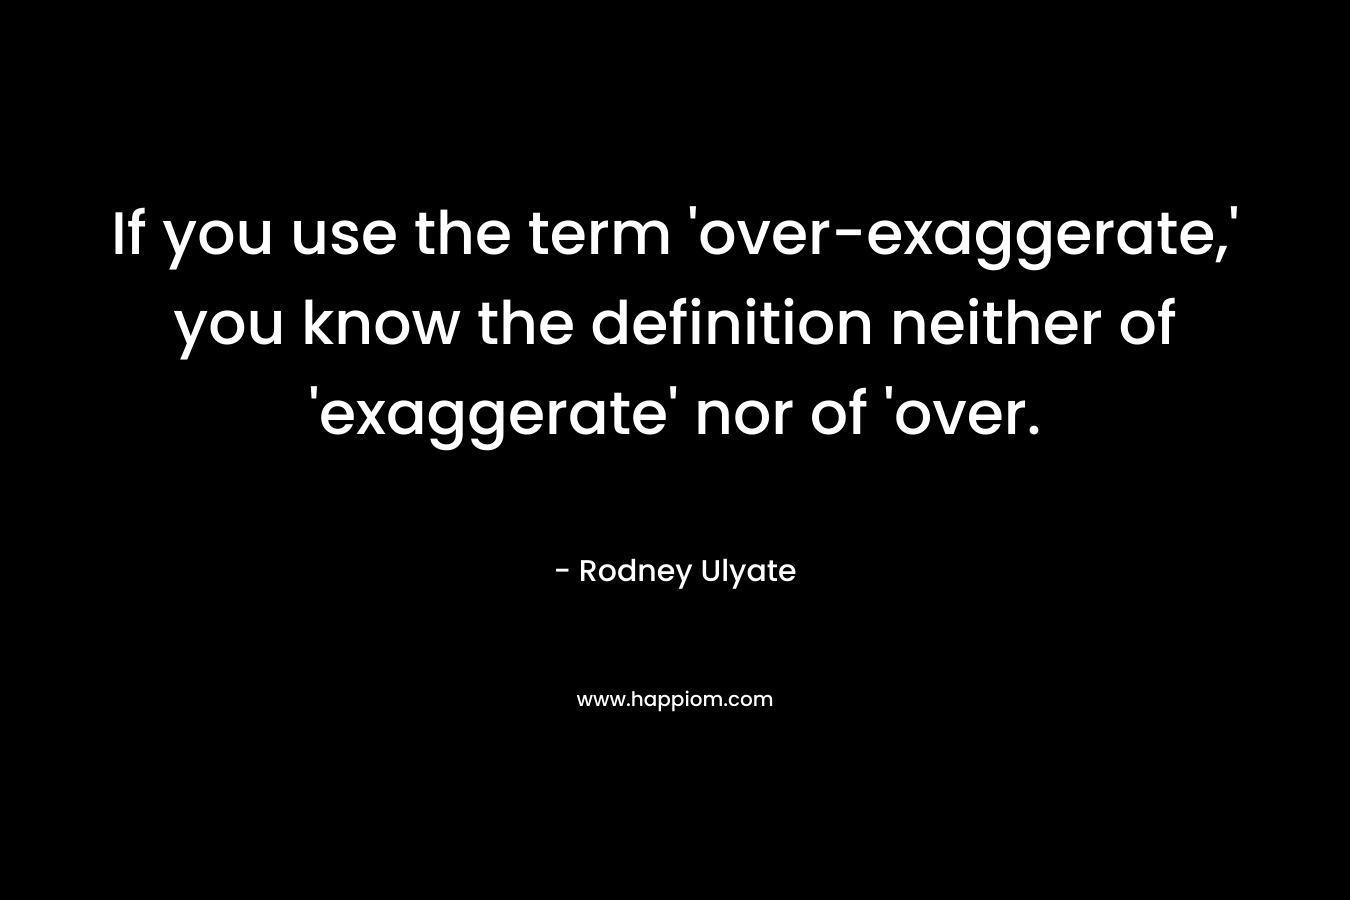 If you use the term ‘over-exaggerate,’ you know the definition neither of ‘exaggerate’ nor of ‘over. – Rodney Ulyate